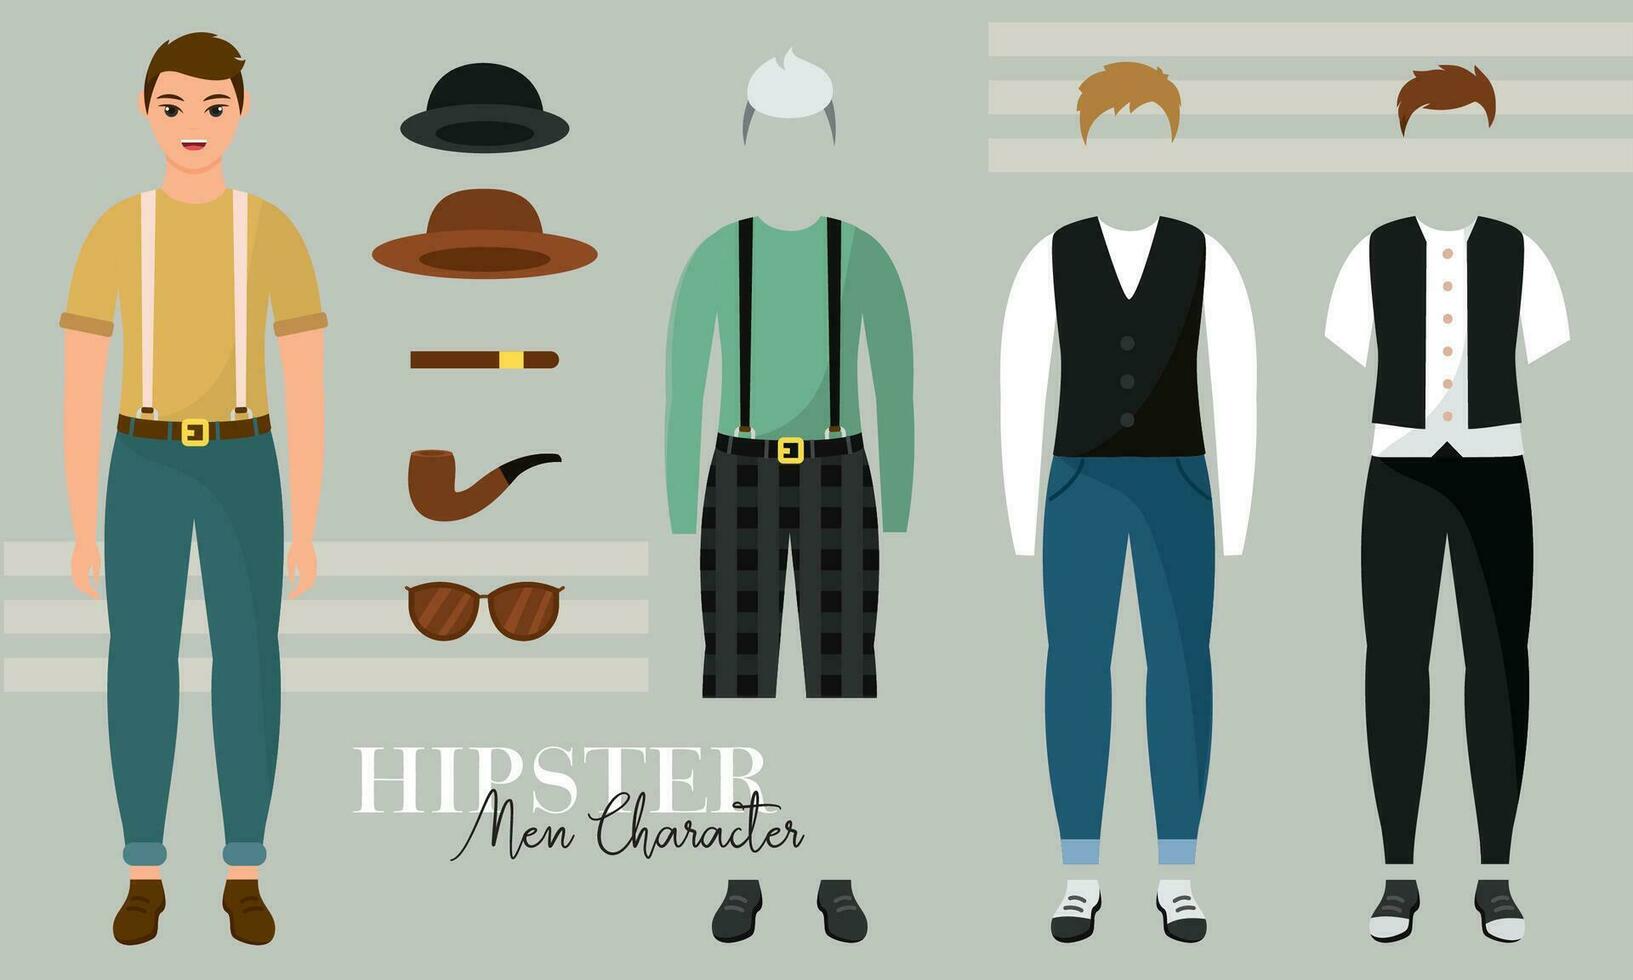 Cute young boy character asset with different clothes accesories Vector